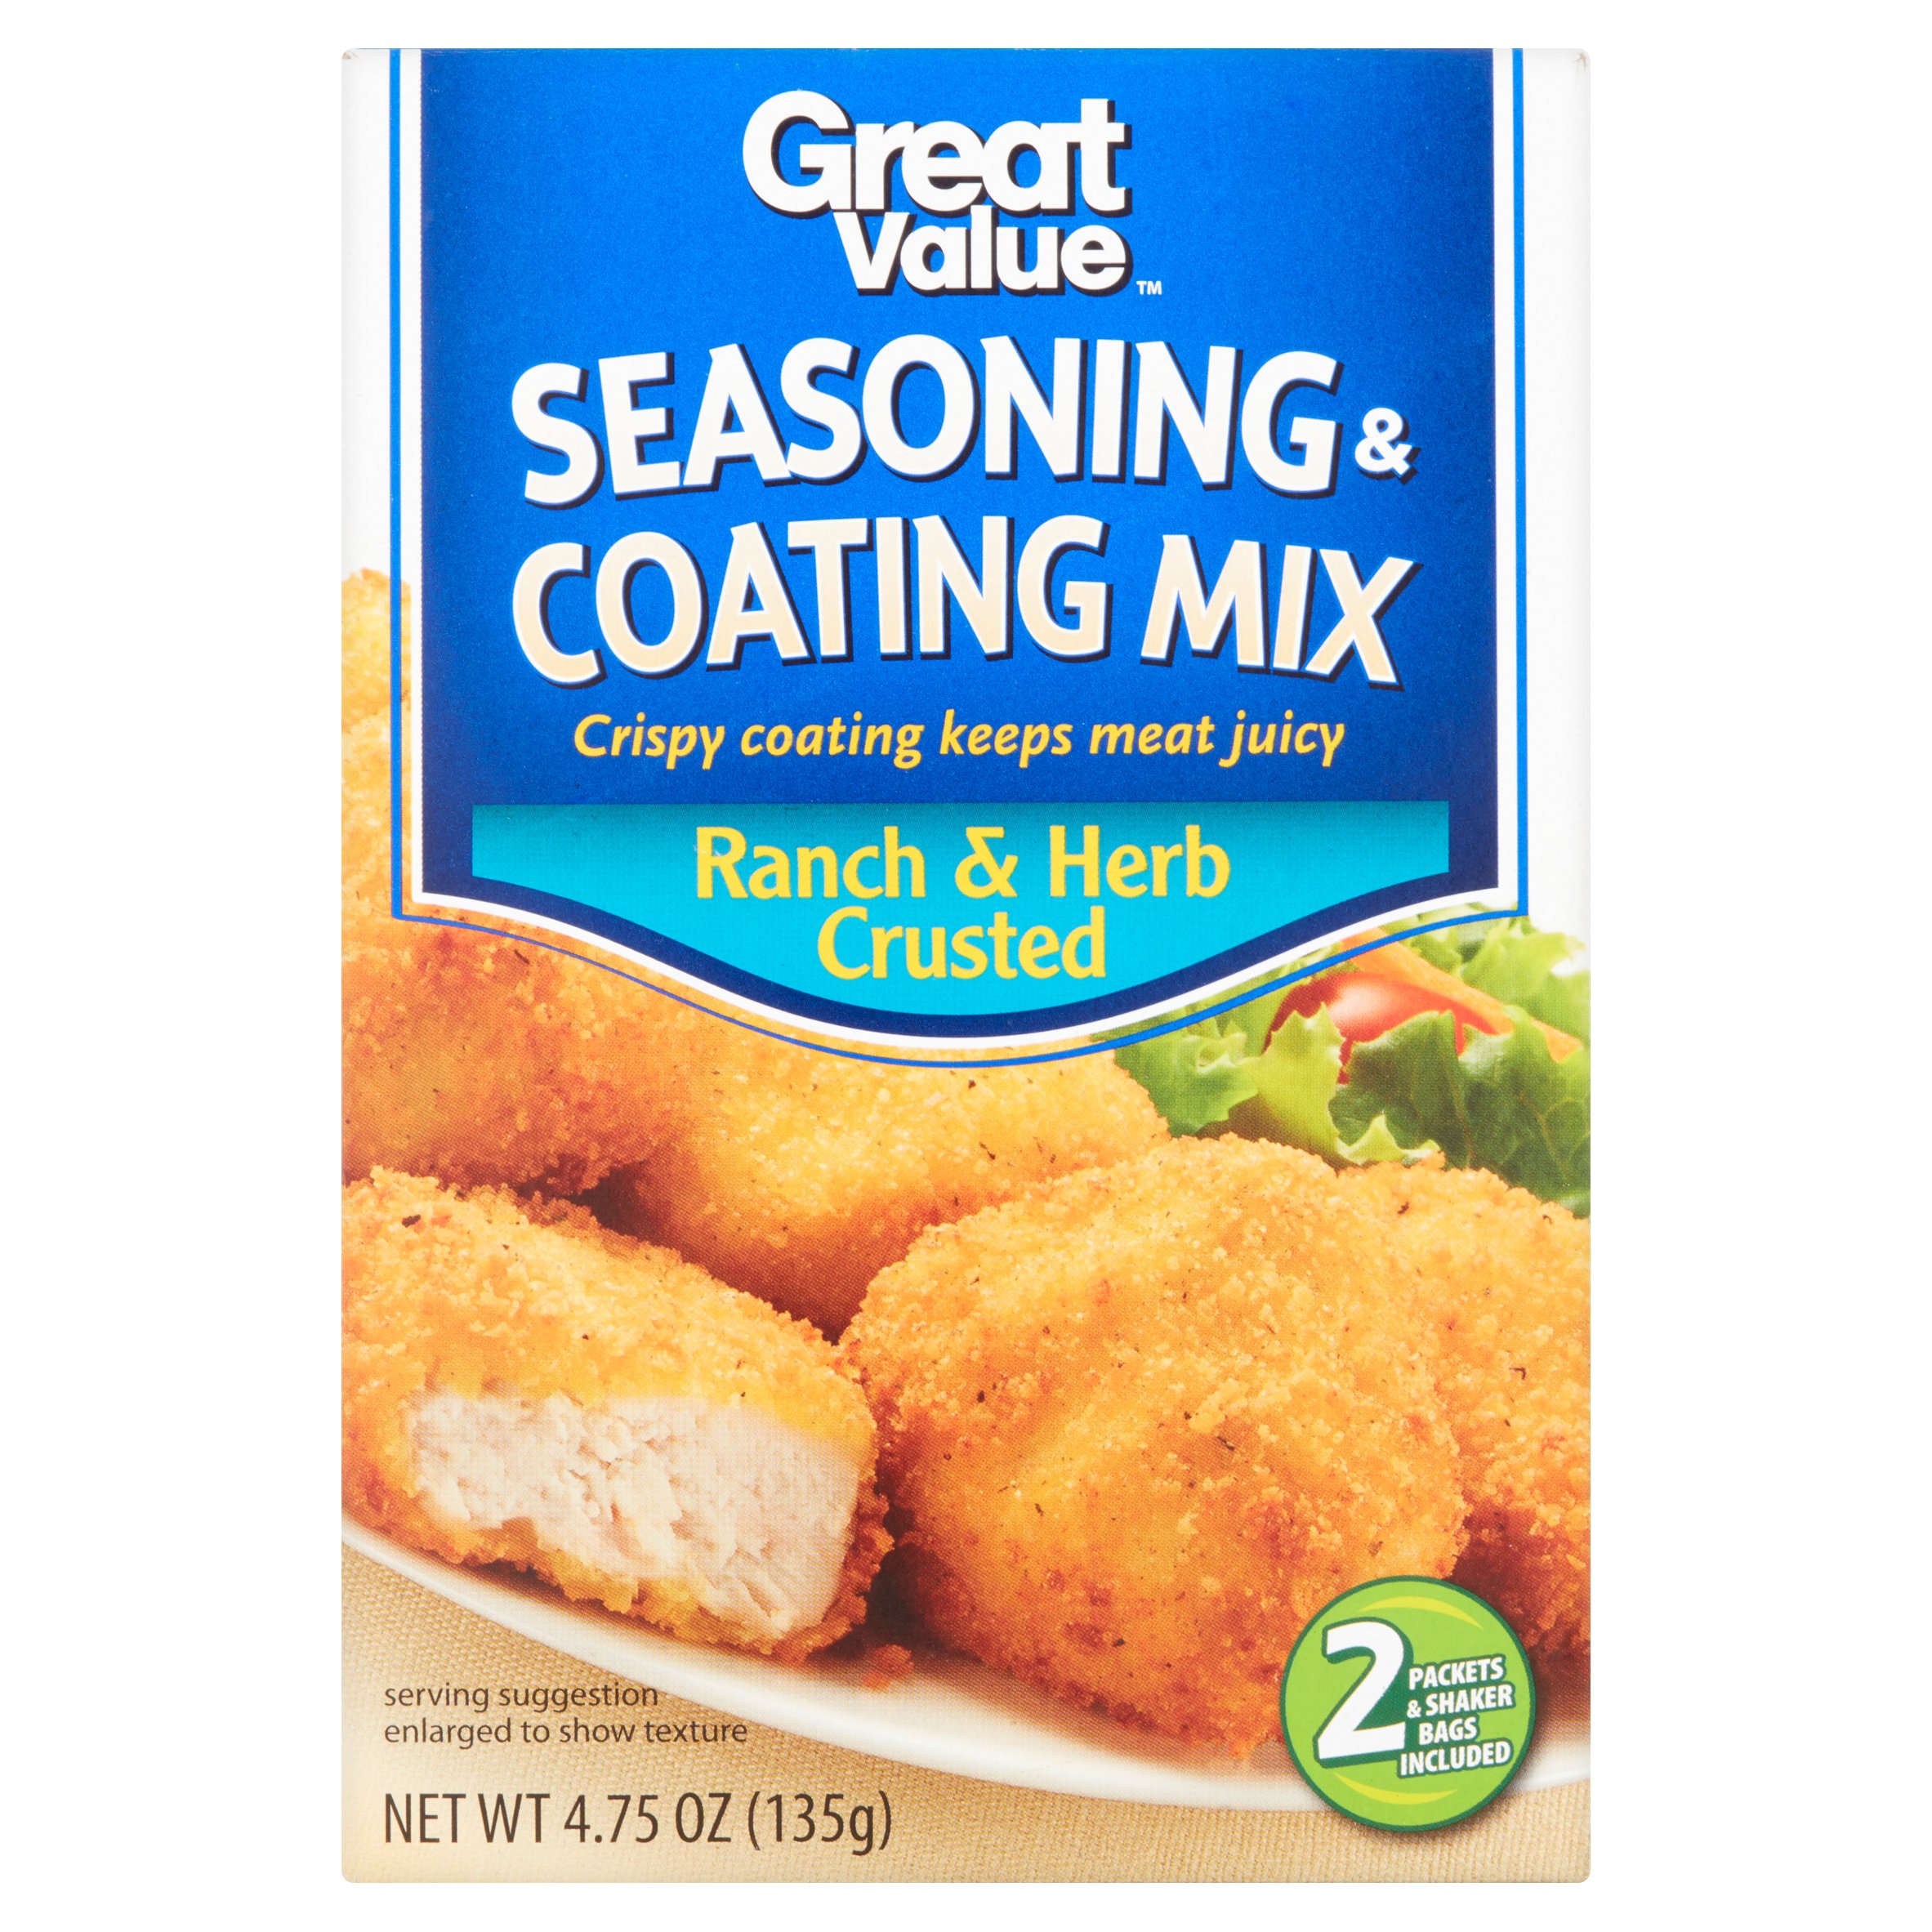 Great Value Ranch & Herb Crusted Seasoning & Coating Mix, 4.75 Oz Image